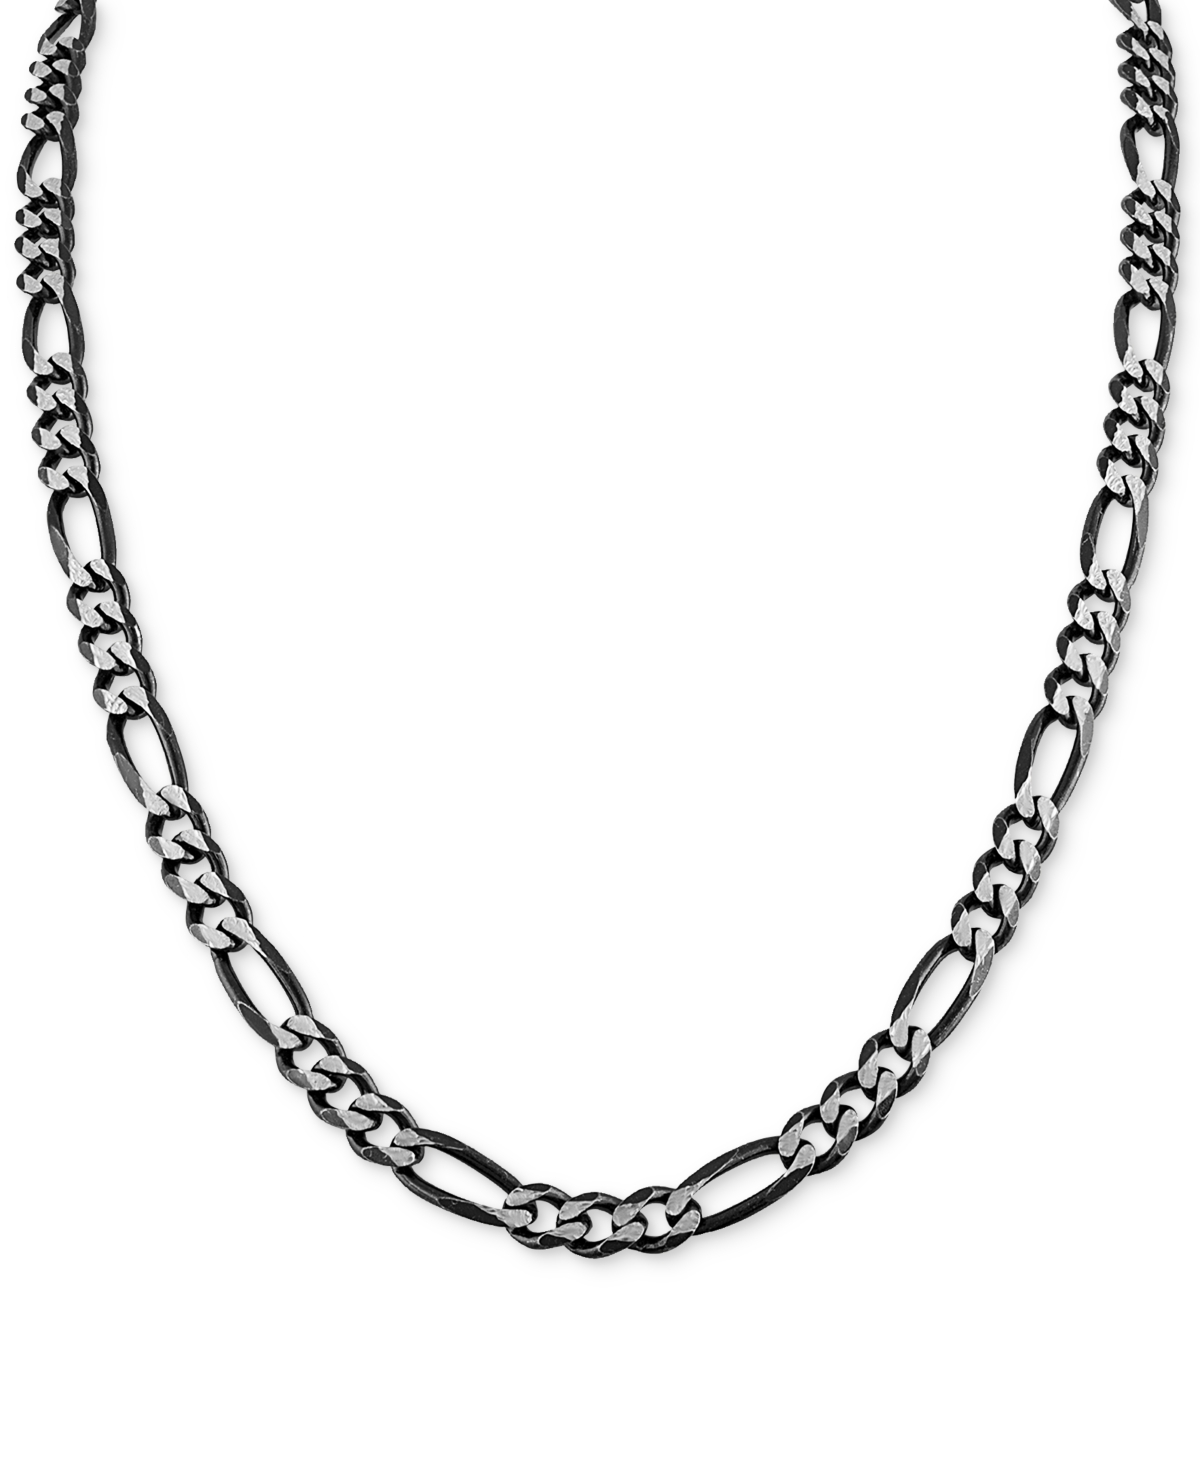 Figaro Link 22" Chain Necklace in Black Ruthenium-Plated Sterling Silver, Created for Macy's - Black